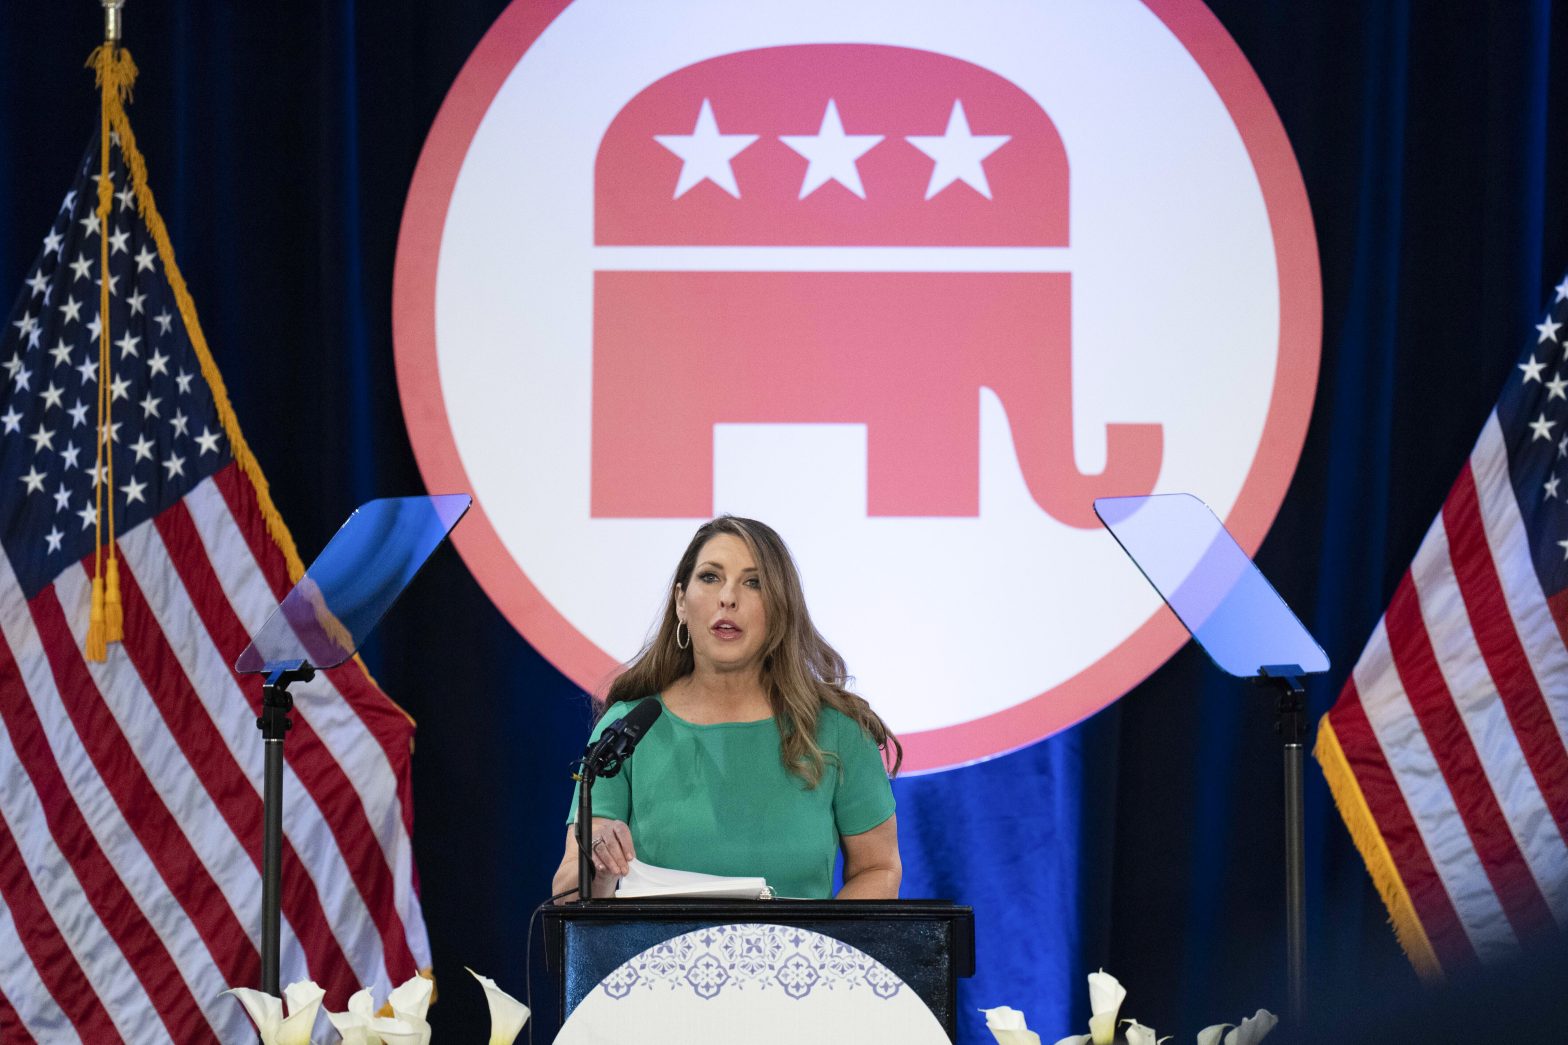 RNC Chair Ronna McDaniel Will Leave Post March 8 as Trump Moves to Install Loyalists